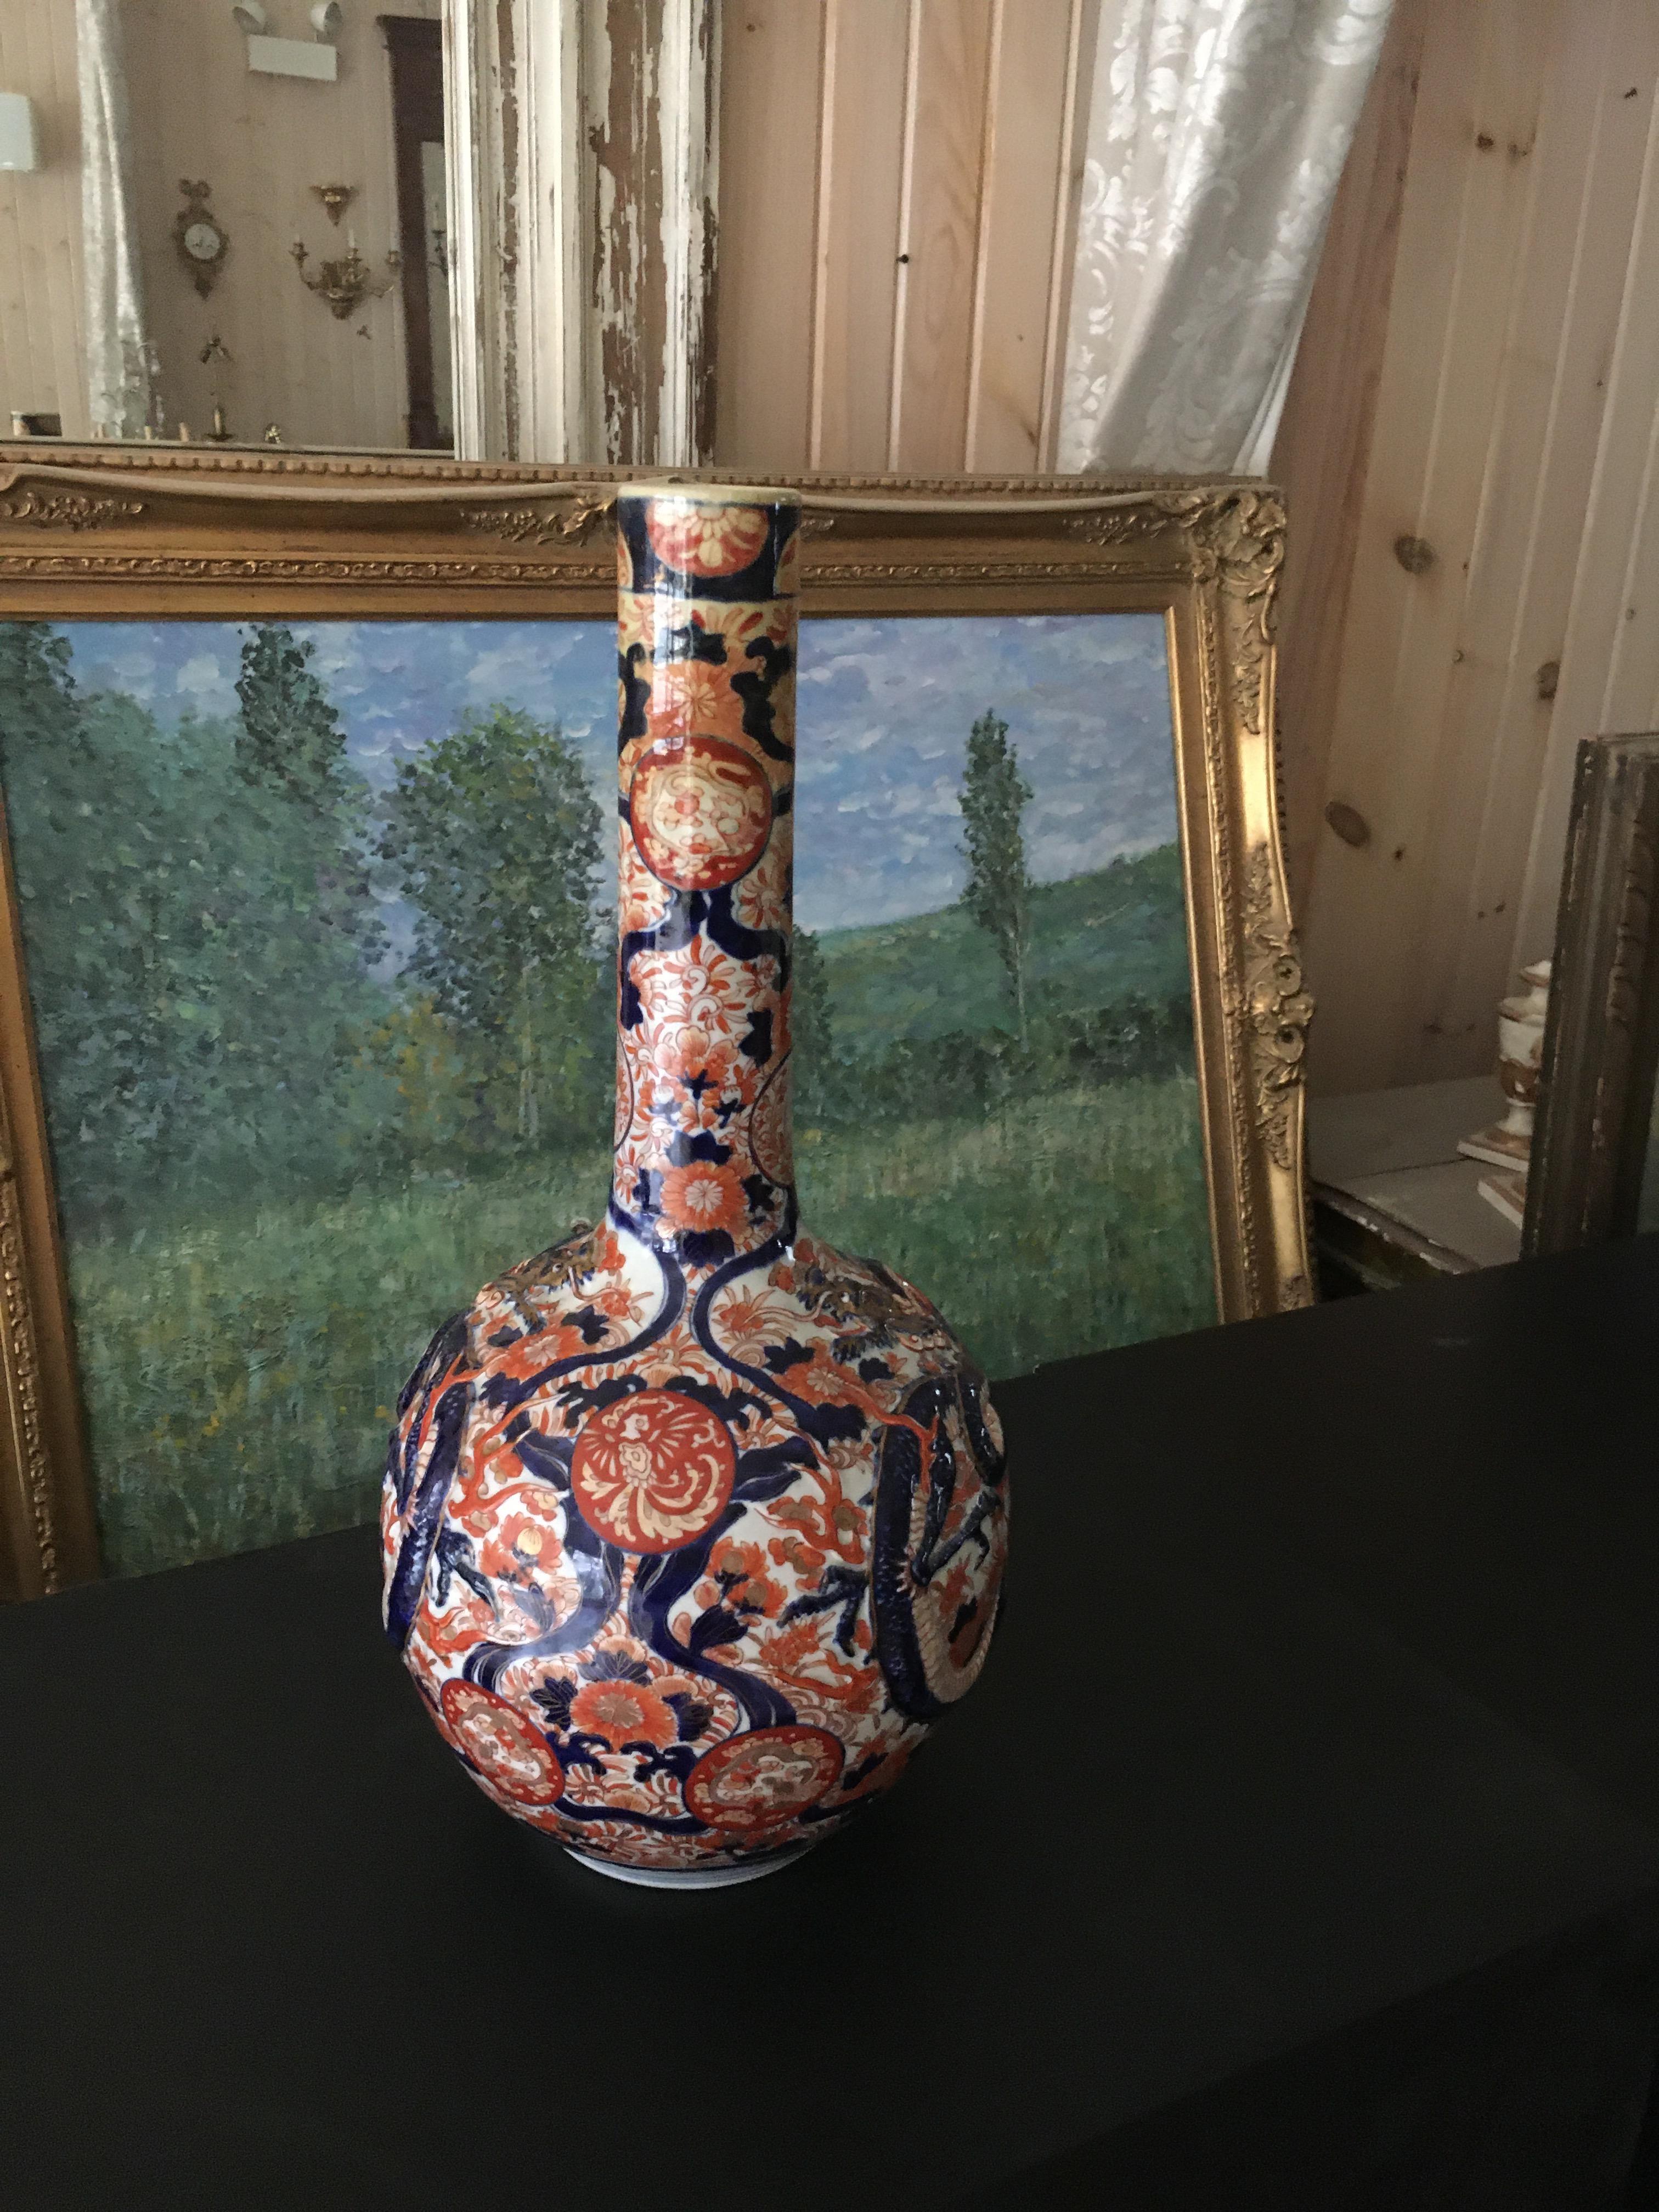 An Imari Porcelain bottle vase.  Very nicely done with great detail and three dimensional areas such as the dragons.  Part of a large collection including vases, chargers and bowls.